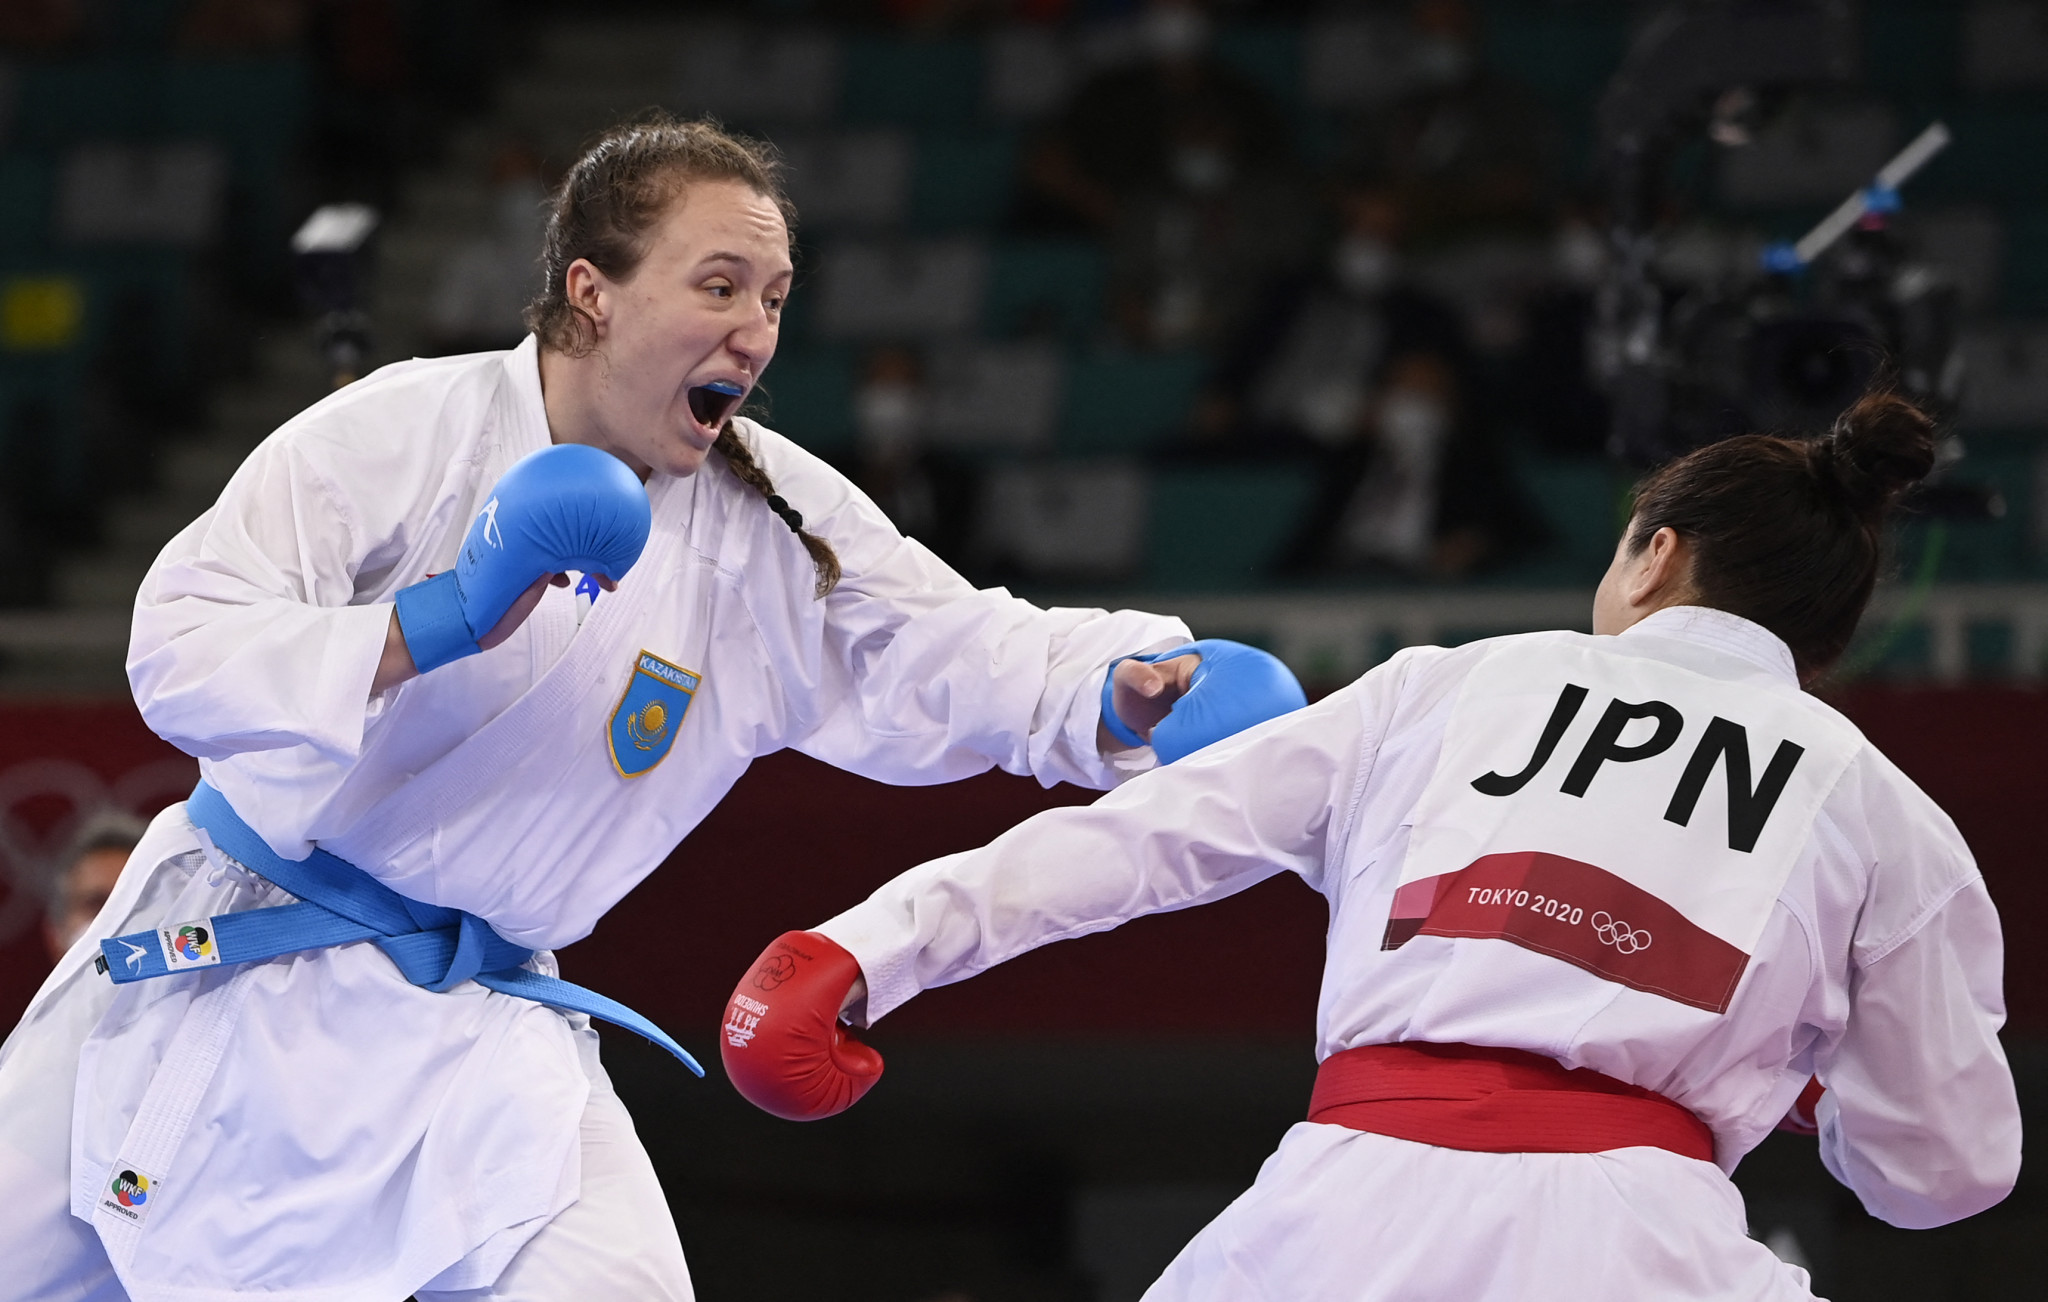 Sofya Berultseva won bronze in the women's over-61kg kumite at Tokyo 2020 and is one of Kazakhstan's 53 representatives at the Asian Karate Championships ©Getty Images